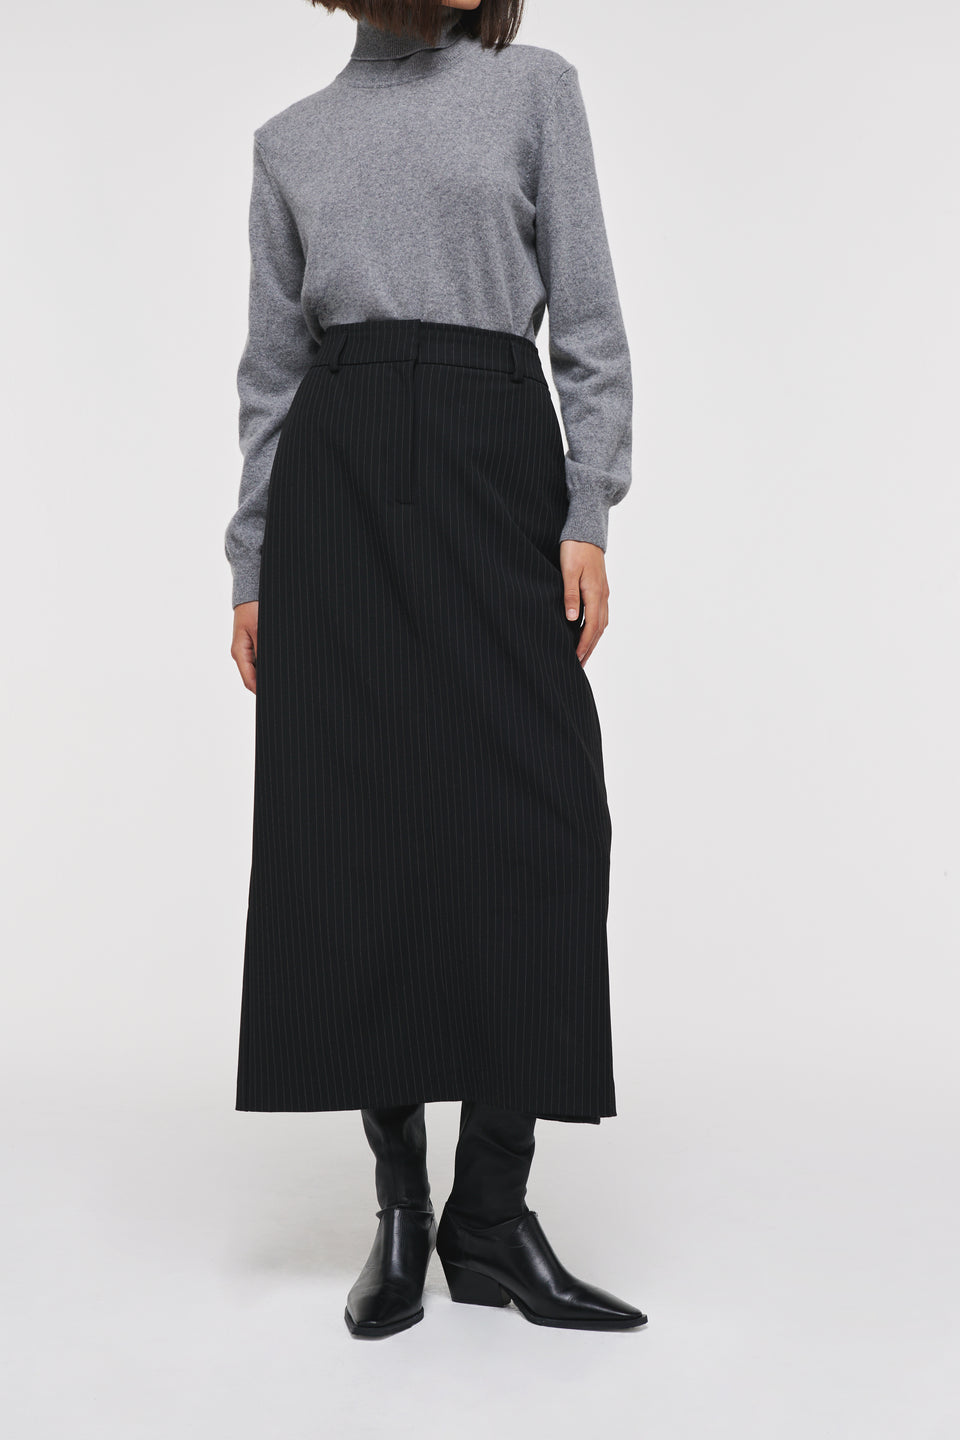 Kasia is a classic pencil skirt with a modern touch. Finished in a beautiful, subtle black pinstripe pattern, it’s the kind of piece that you can wear in many ways. Style with a cosy turtleneck for colder days, or wear with your favourite t-shirt for a more casual look.